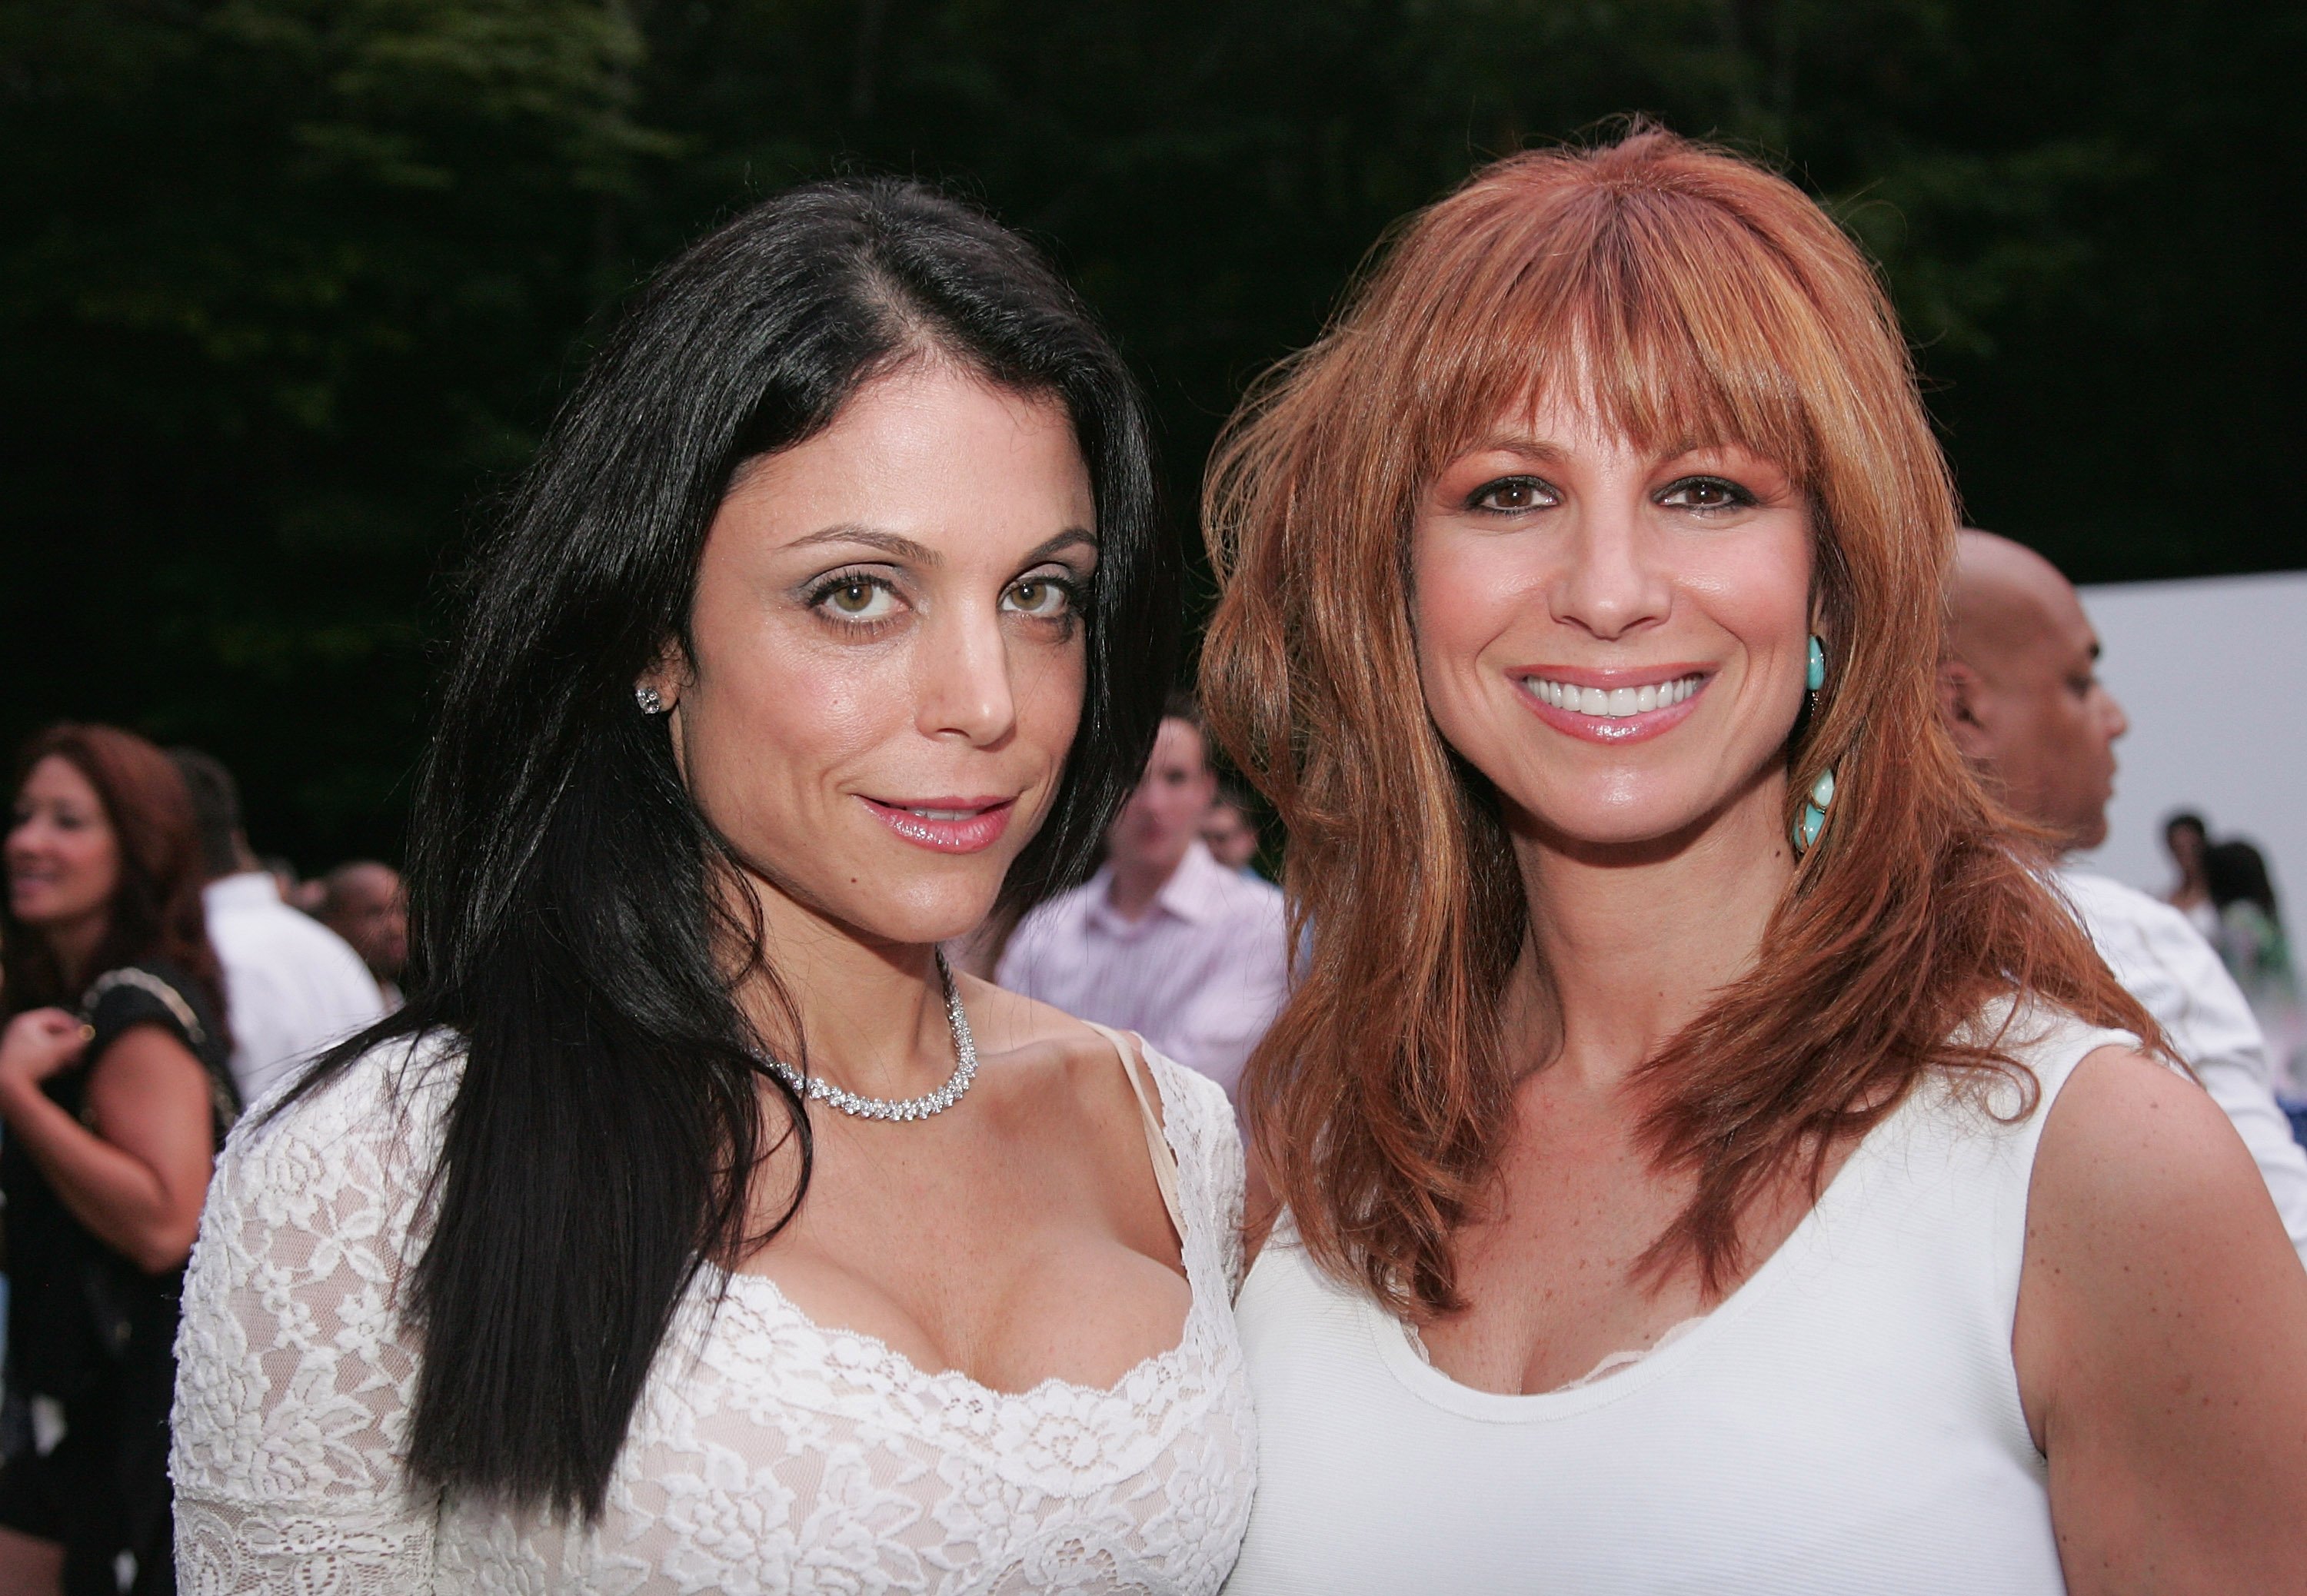 Bethenny Frankel and Jill Zarin at Bobby and Jill Zarin's Annual Fourth of July Party July 4, 2008 in Sag Harbor, New York